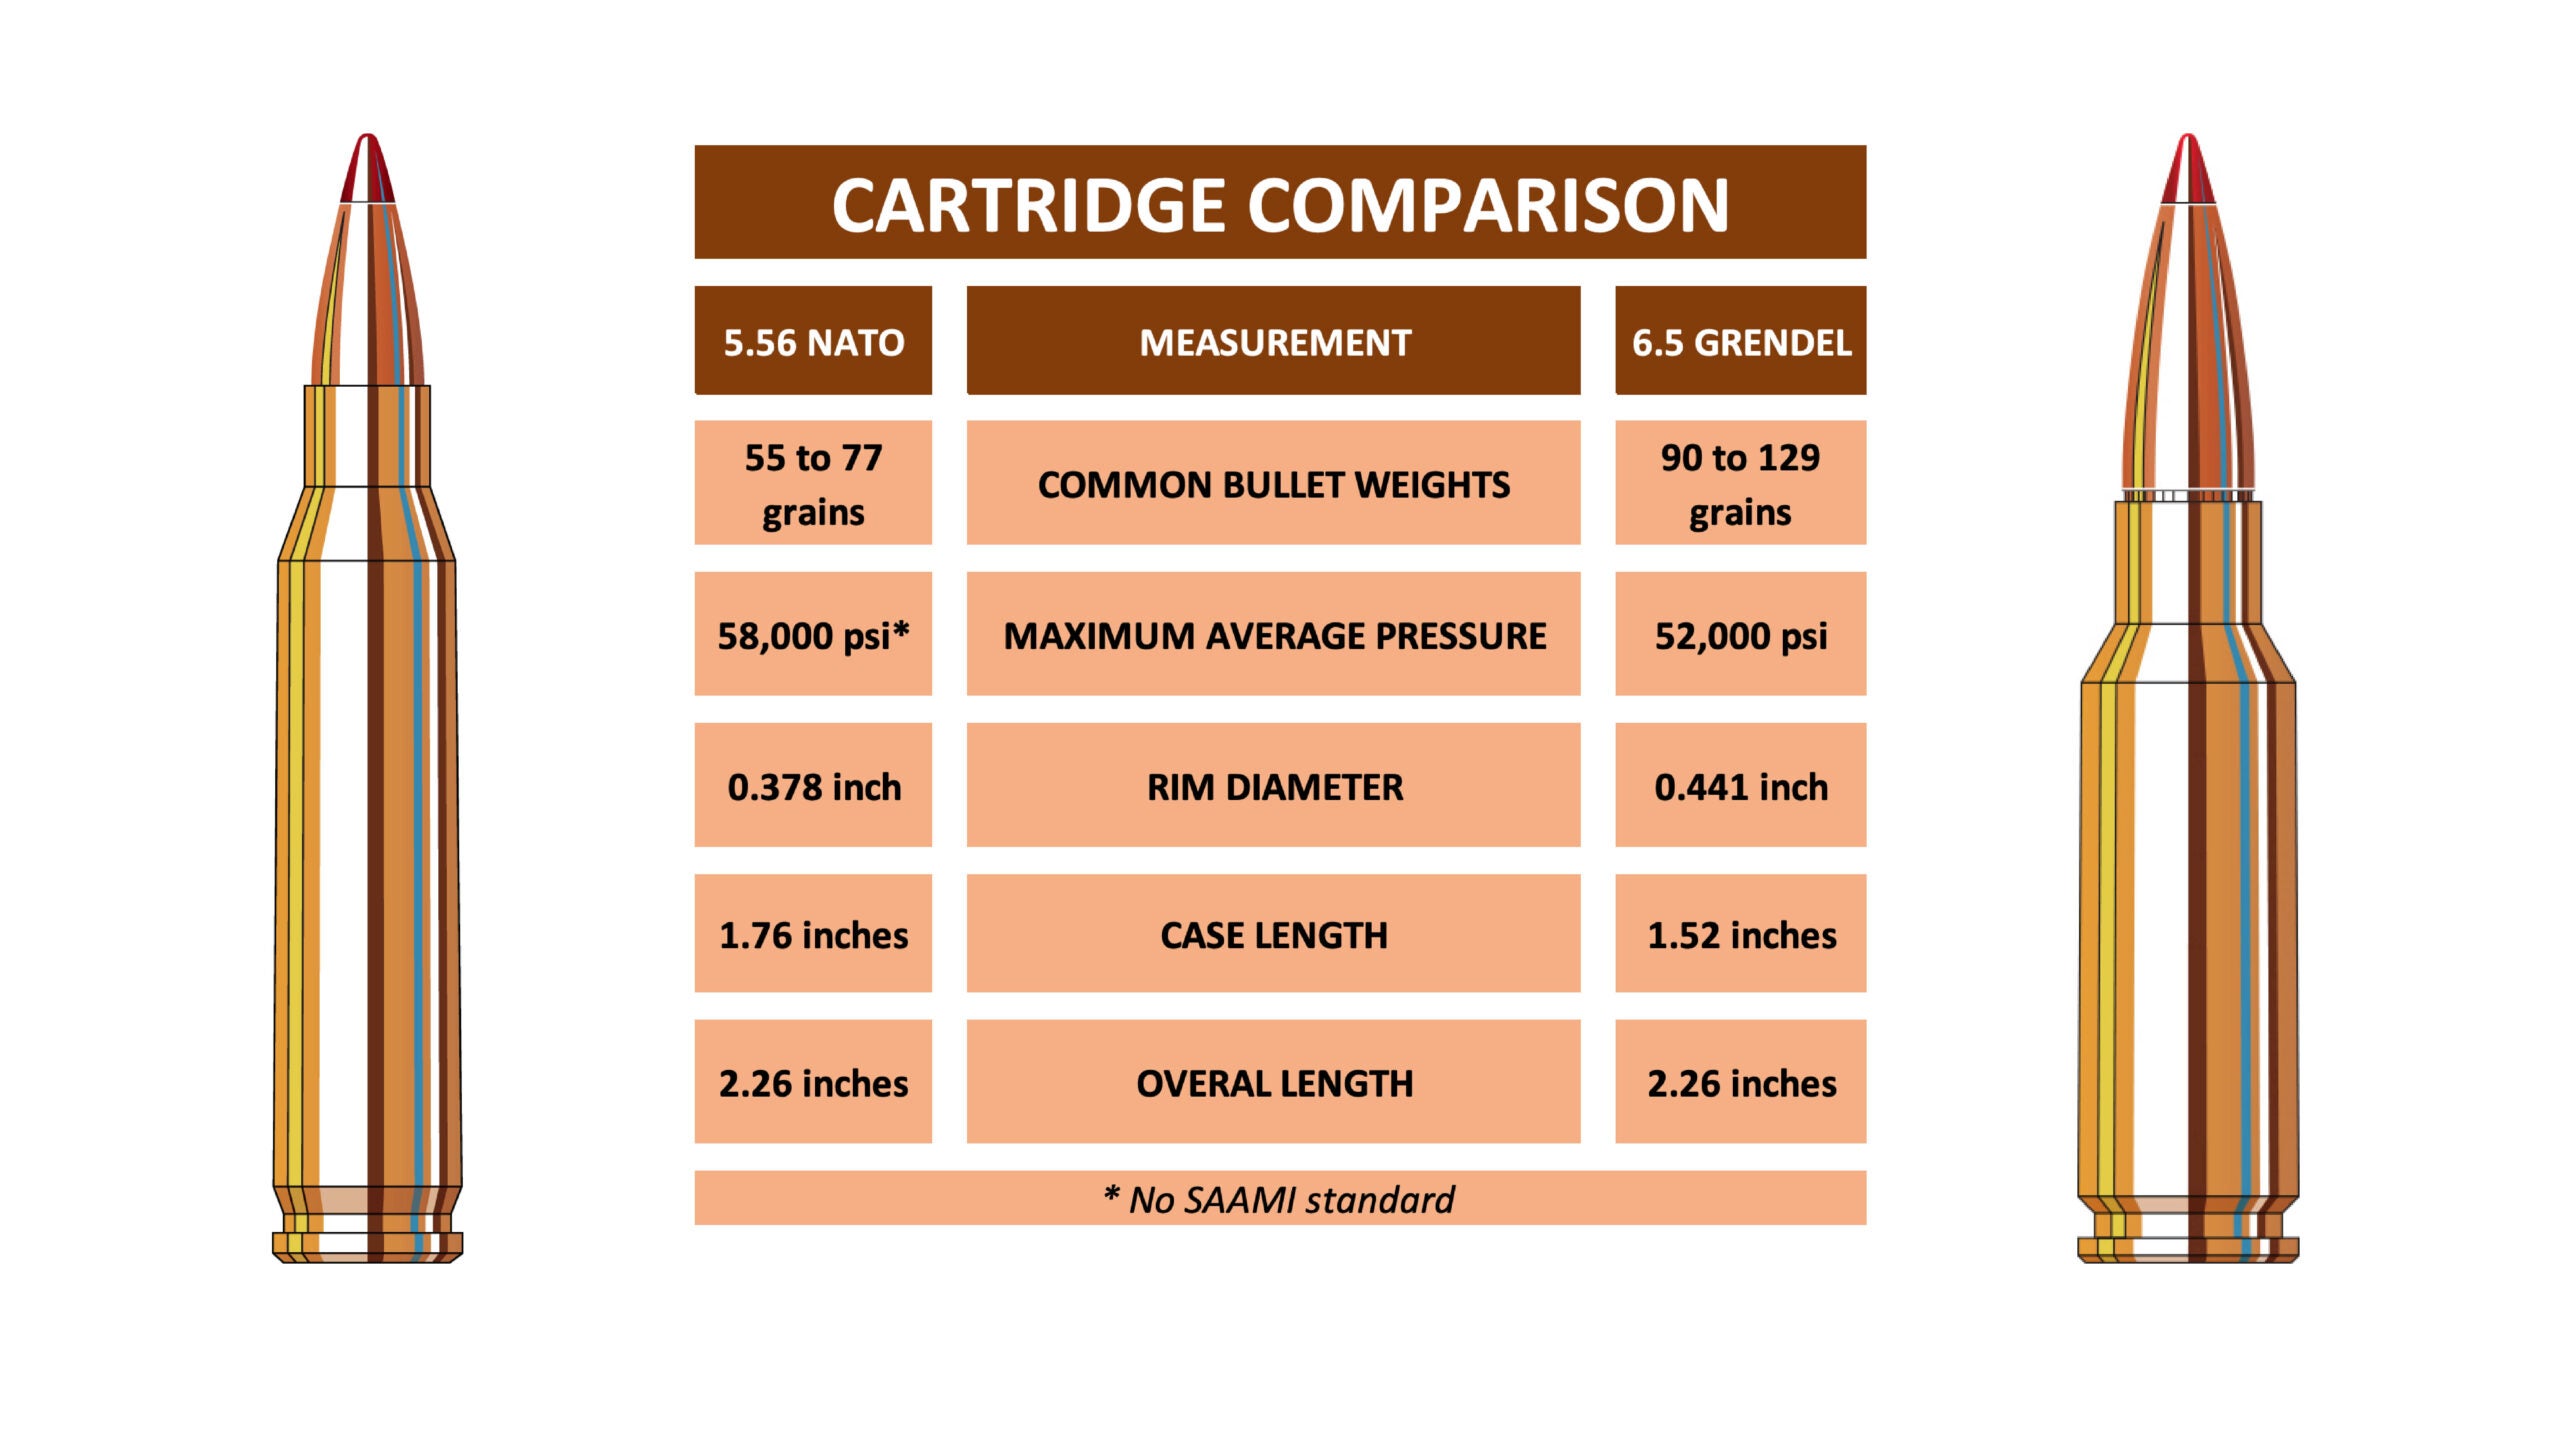 Chart showing cartridge comparison between 6.5 Grendel and 5.56 NATO